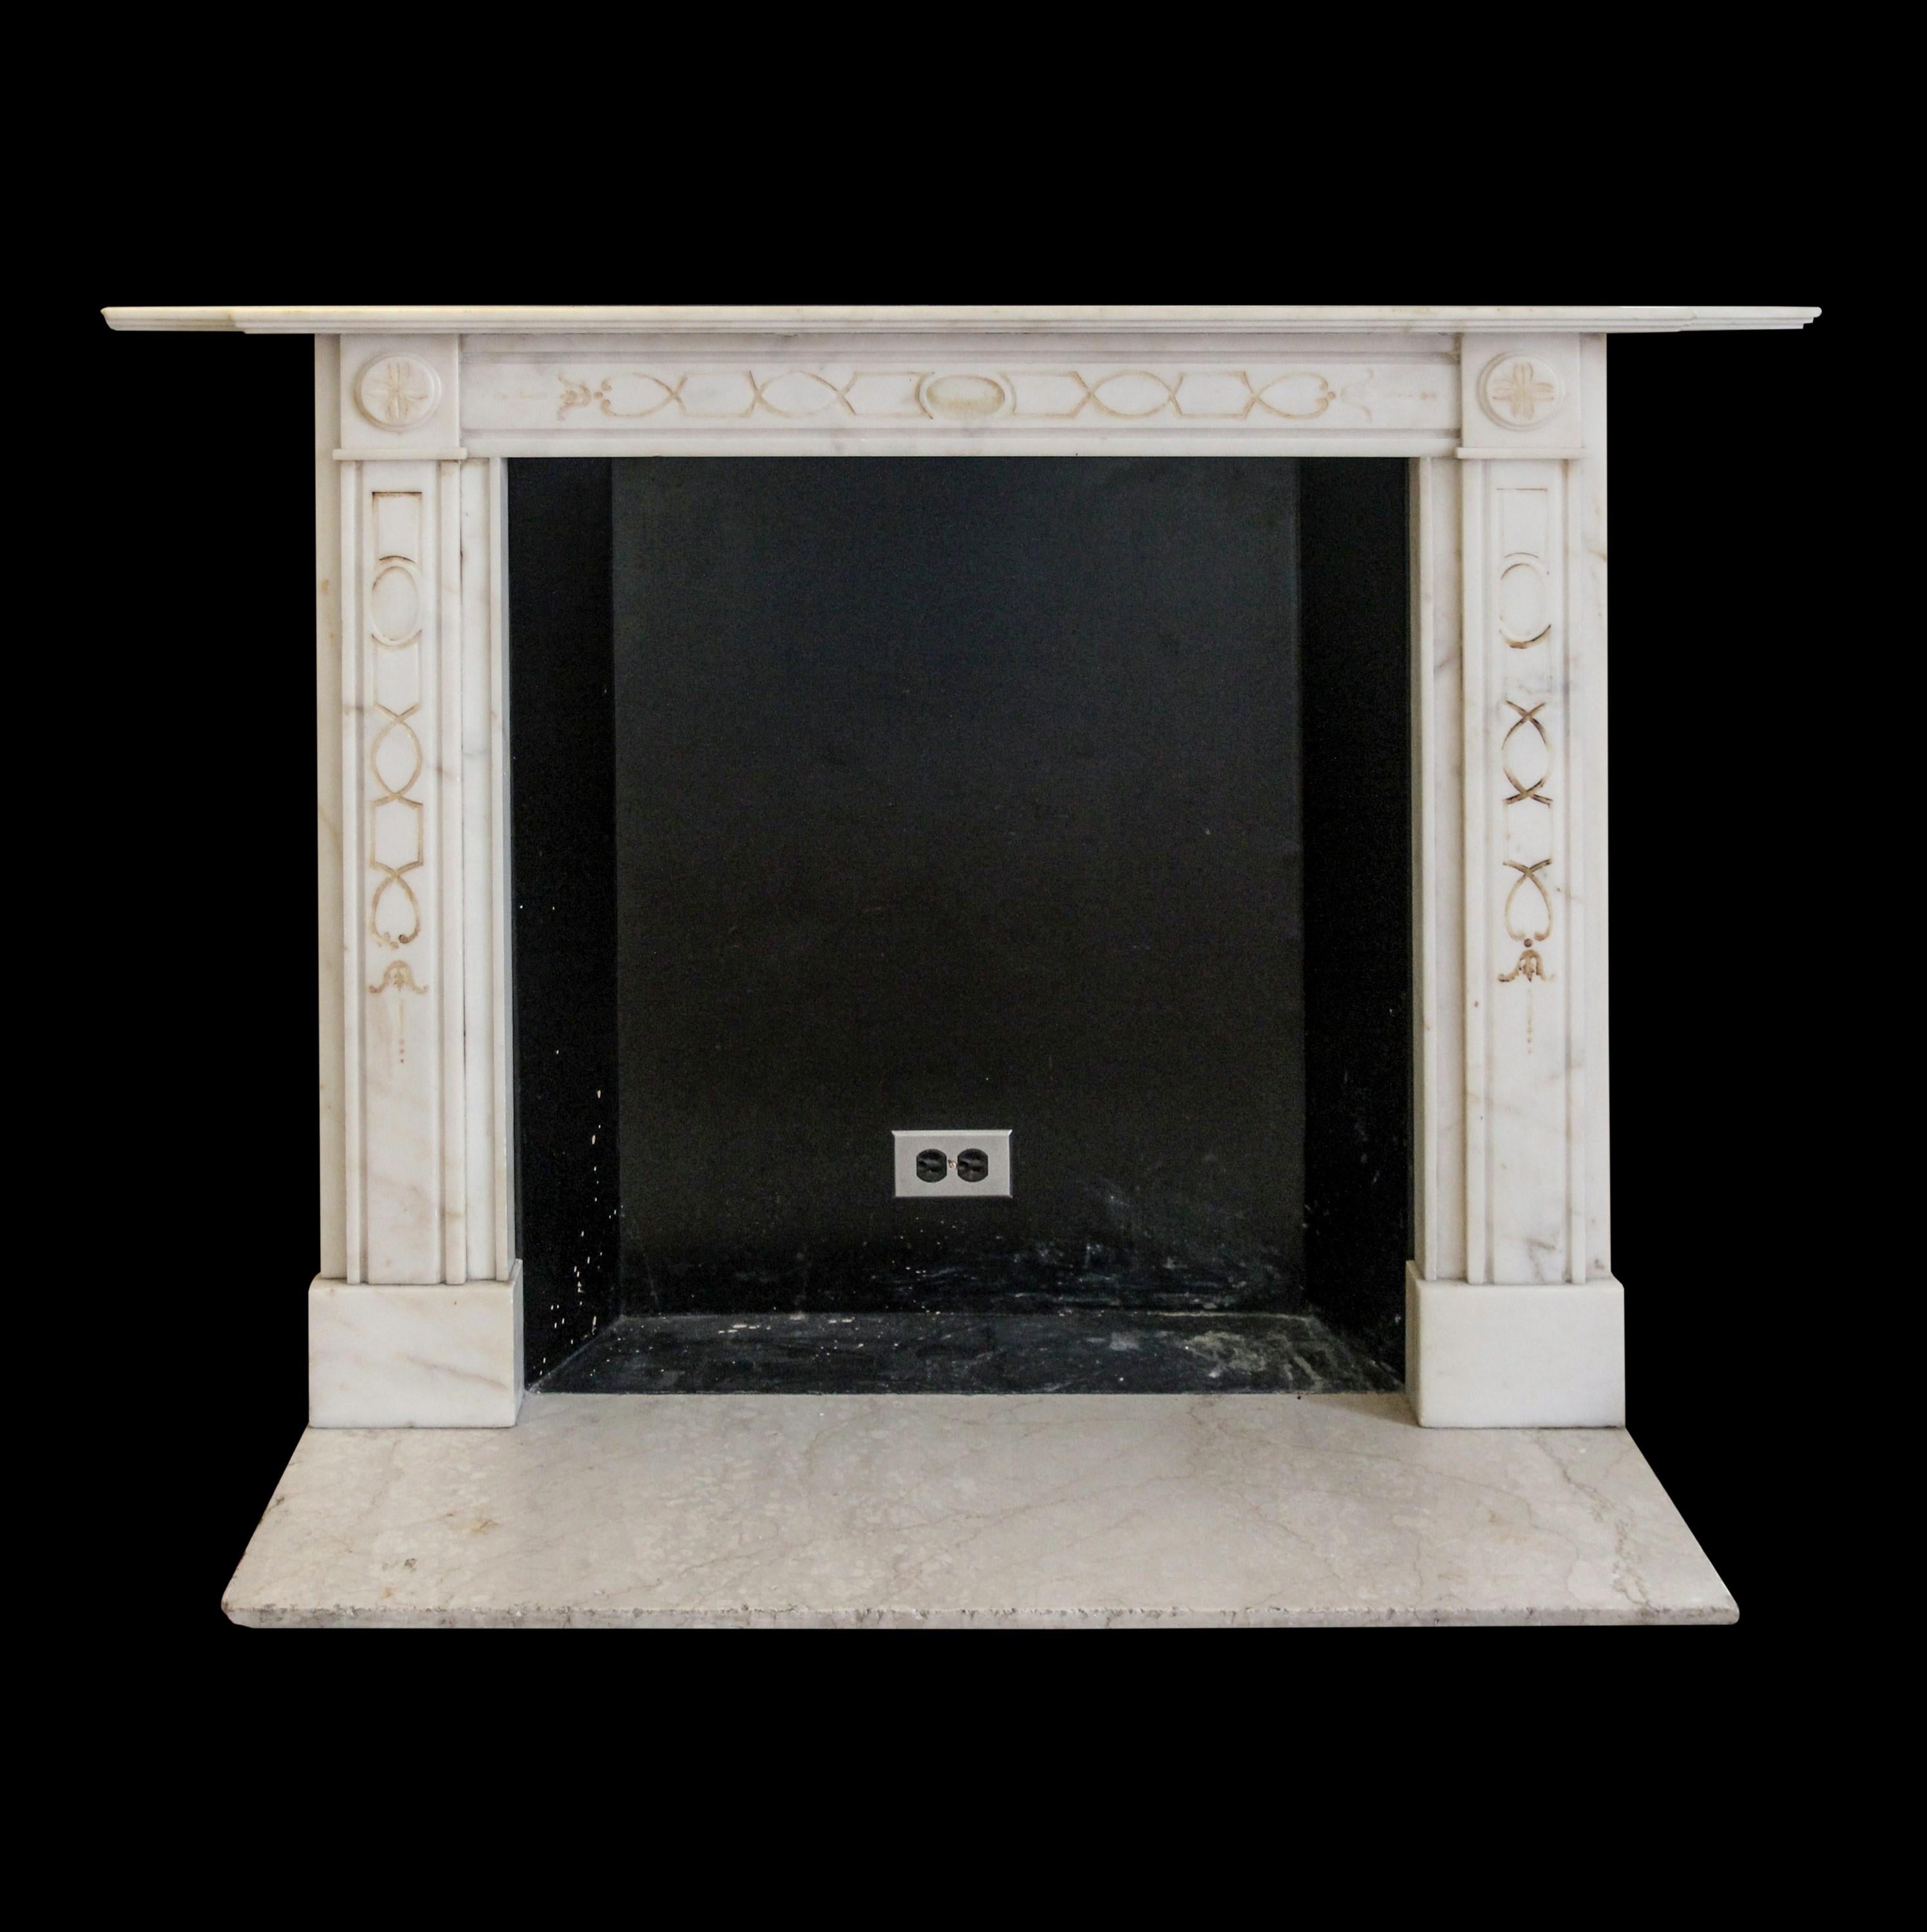 Early 20th Century English Regency style hand carved marble mantel featuring very simple carved line detailing across the front apron and corners also along both vertical legs. The gold coloring within these carved lines has somewhat faded. The